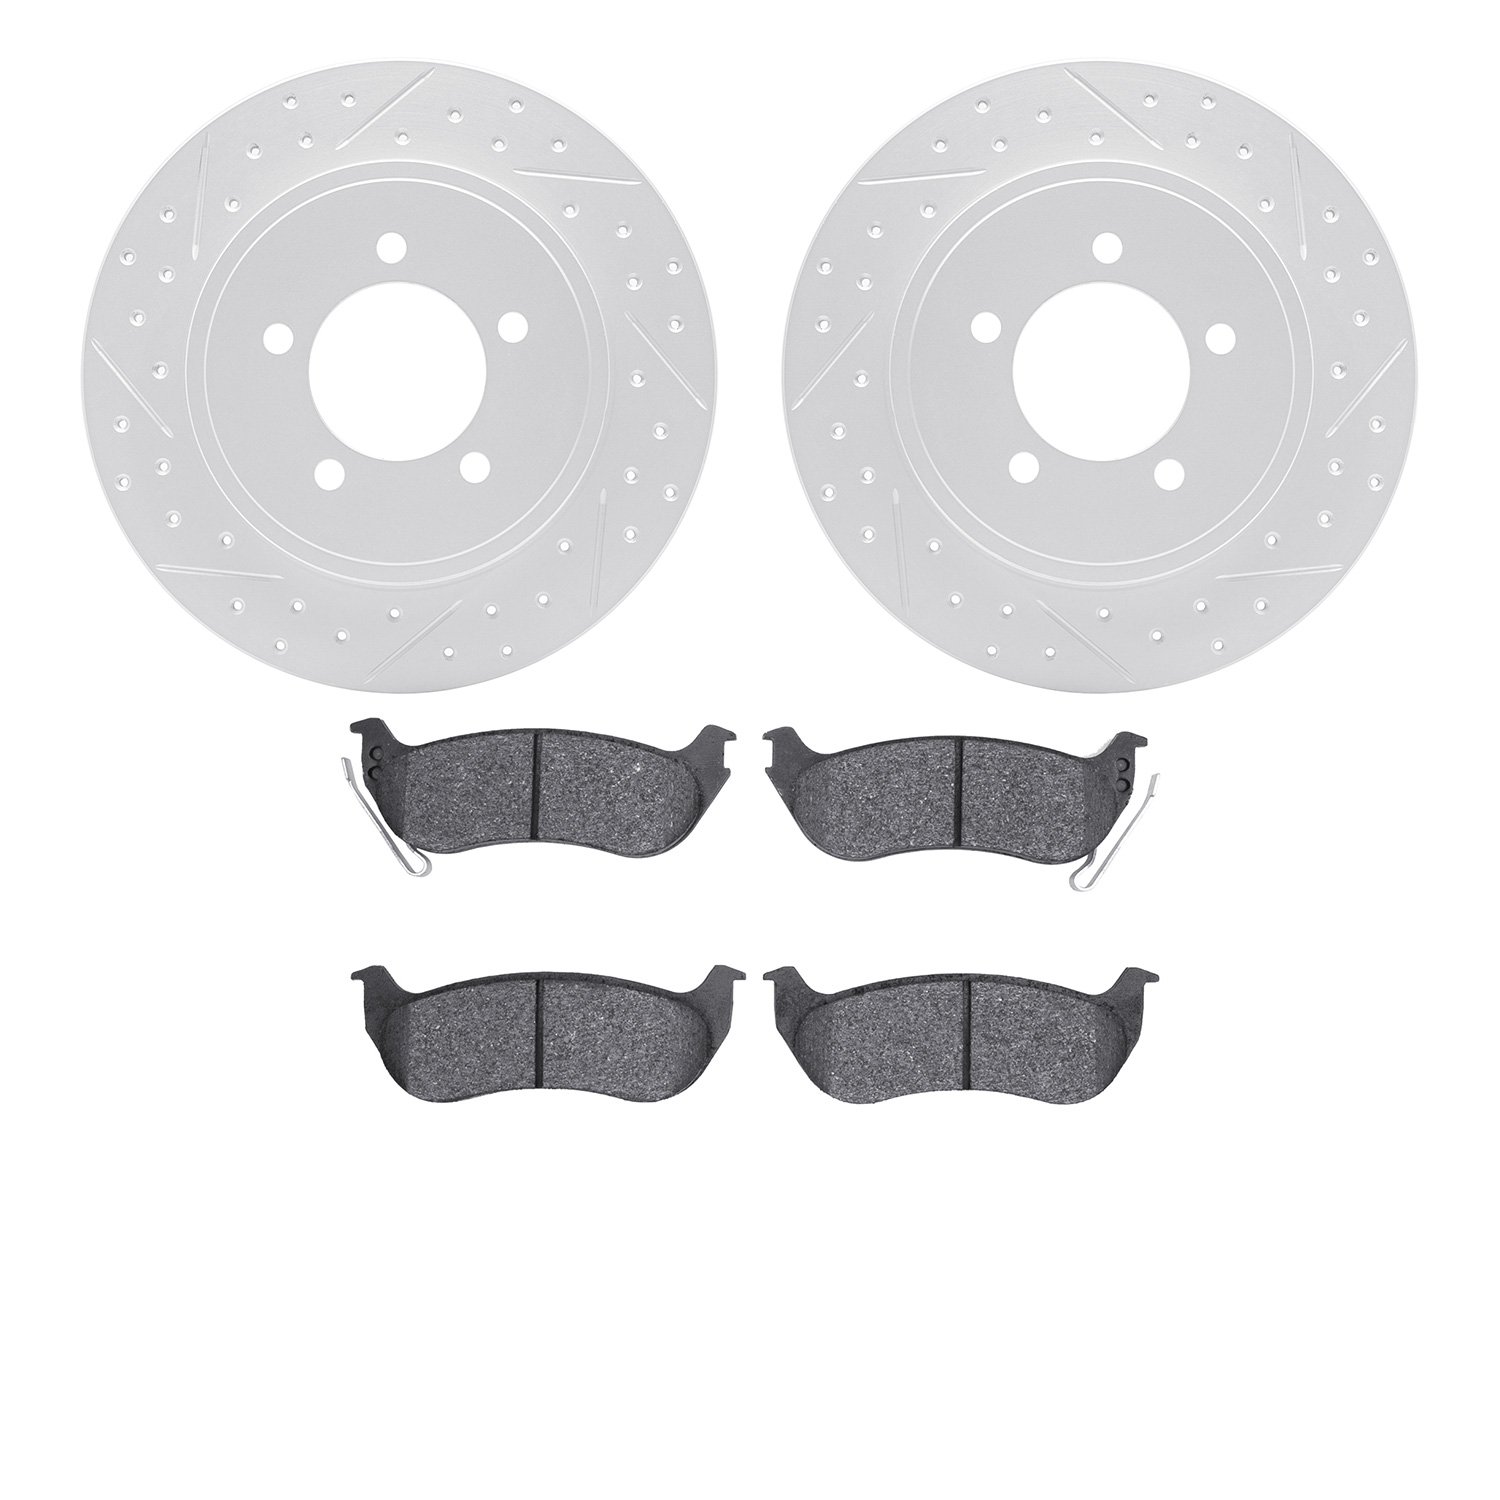 2202-54007 Geoperformance Drilled/Slotted Rotors w/Heavy-Duty Pads Kit, 2006-2010 Ford/Lincoln/Mercury/Mazda, Position: Rear